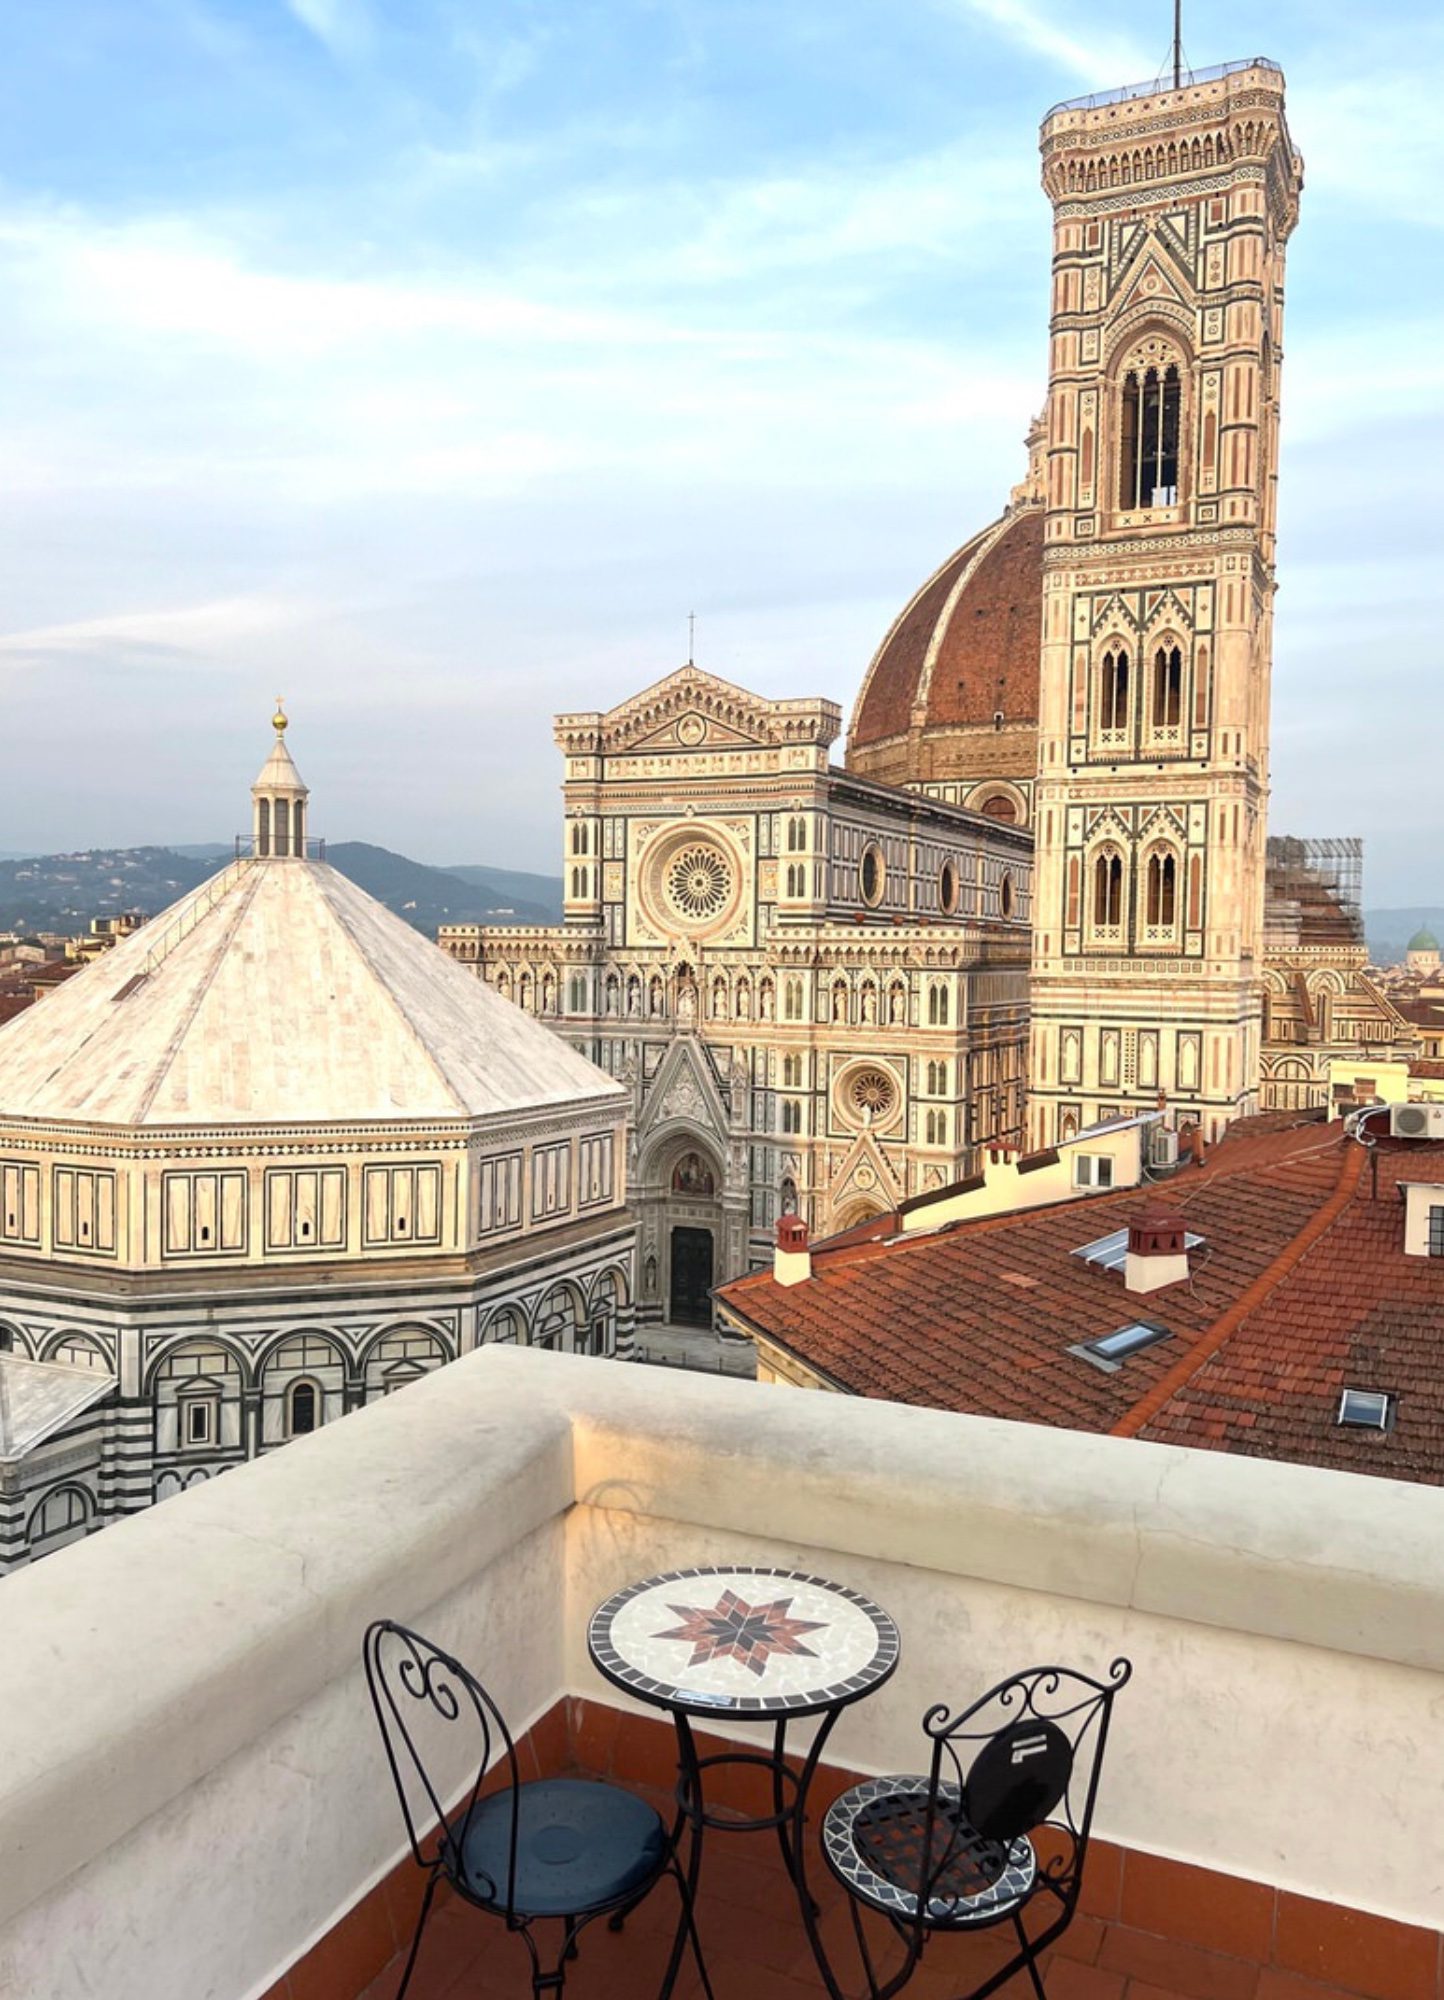 1 DAY IN FLORENCE